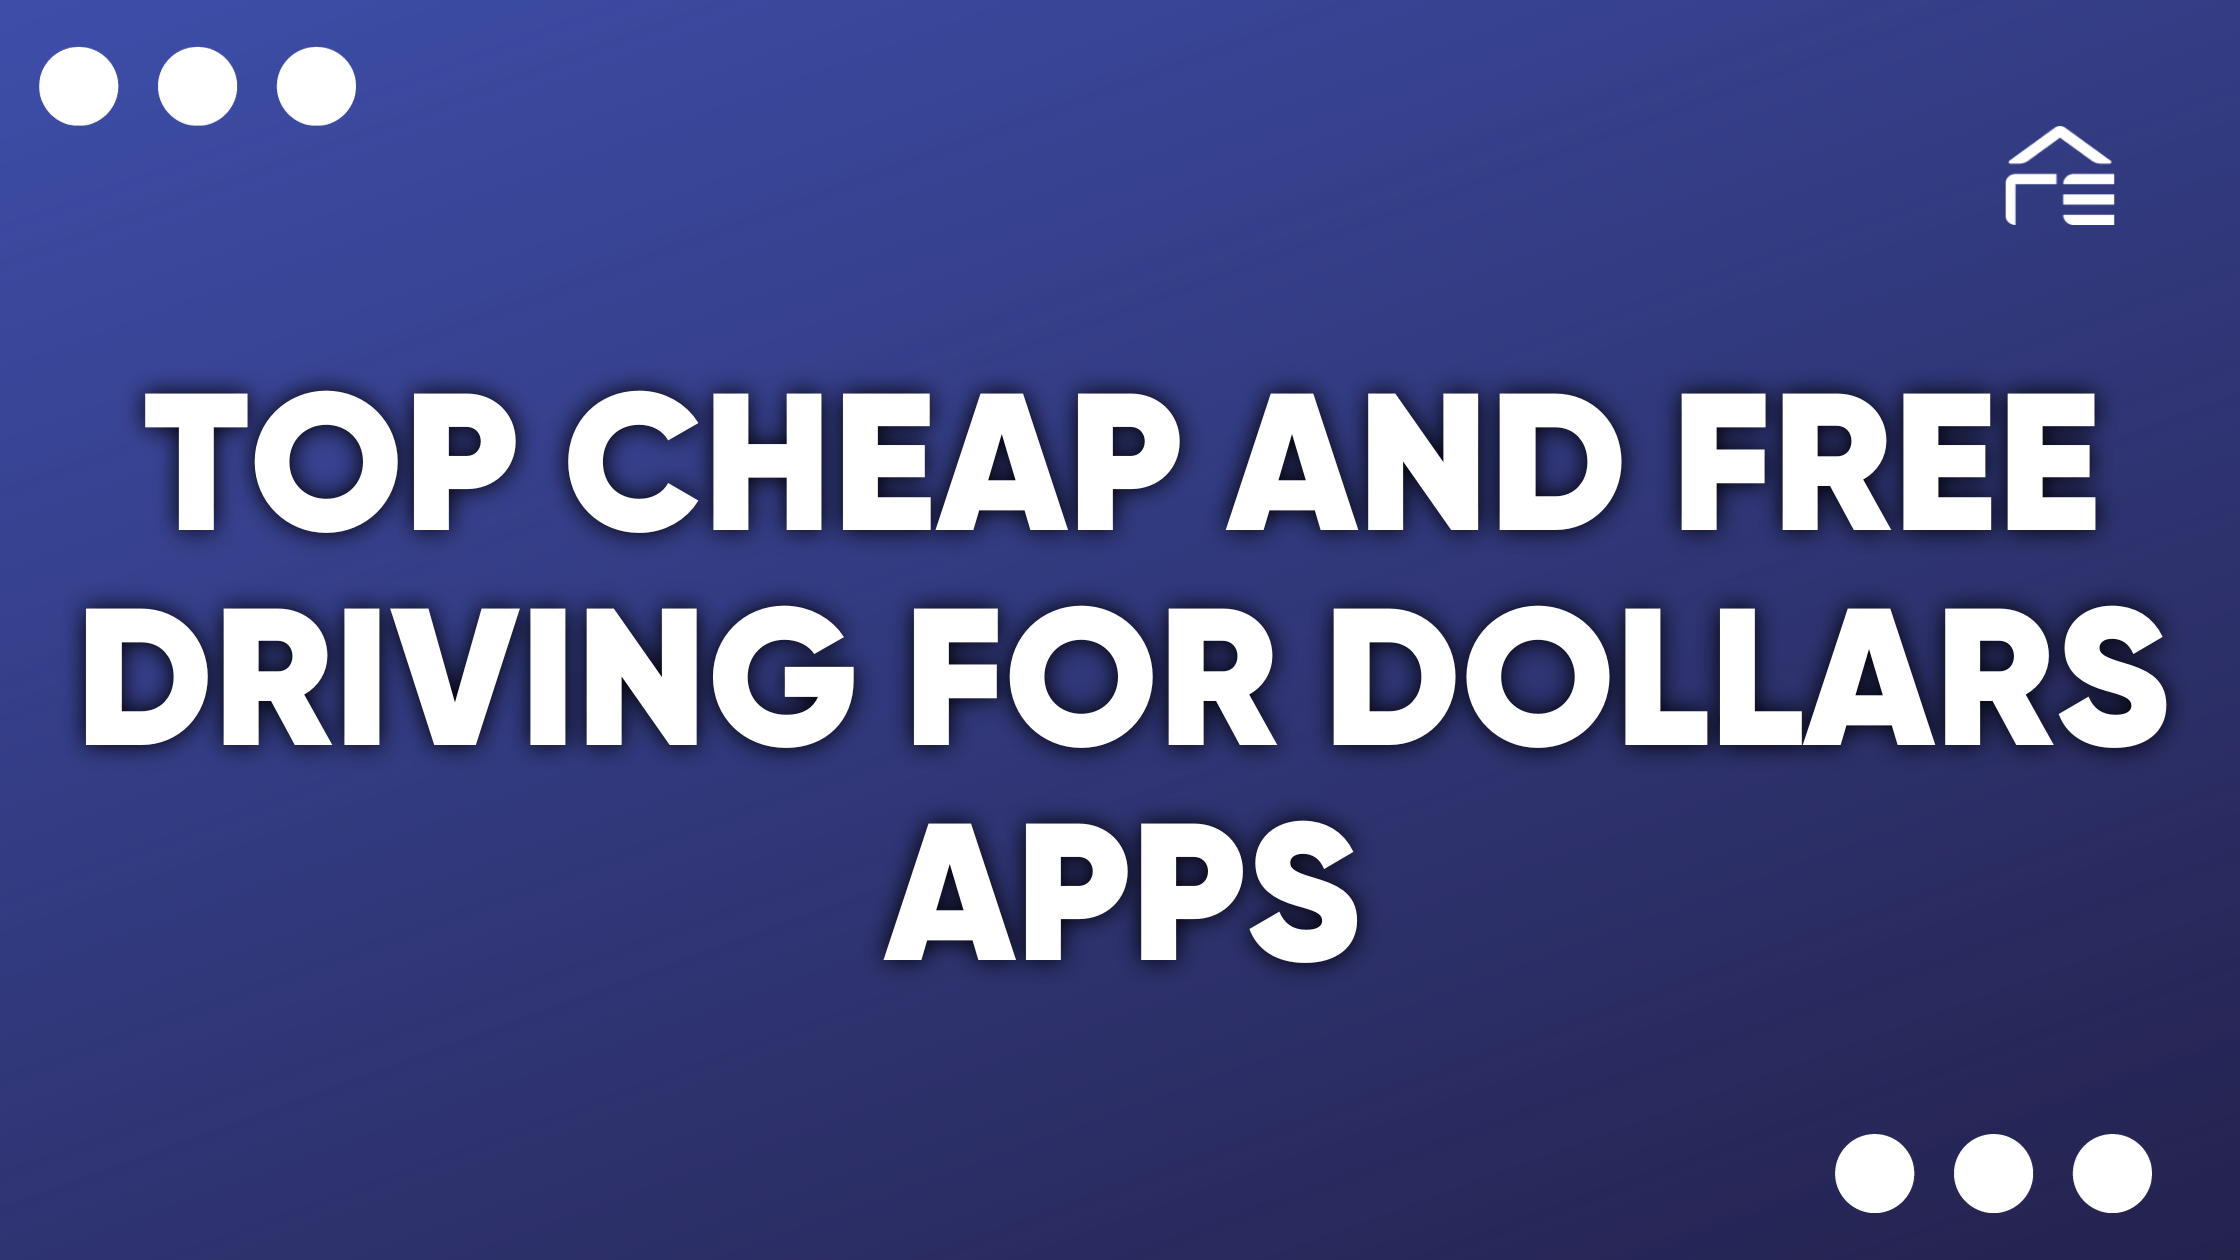 Comparing the Top Cheap and Free Driving for Dollars Apps